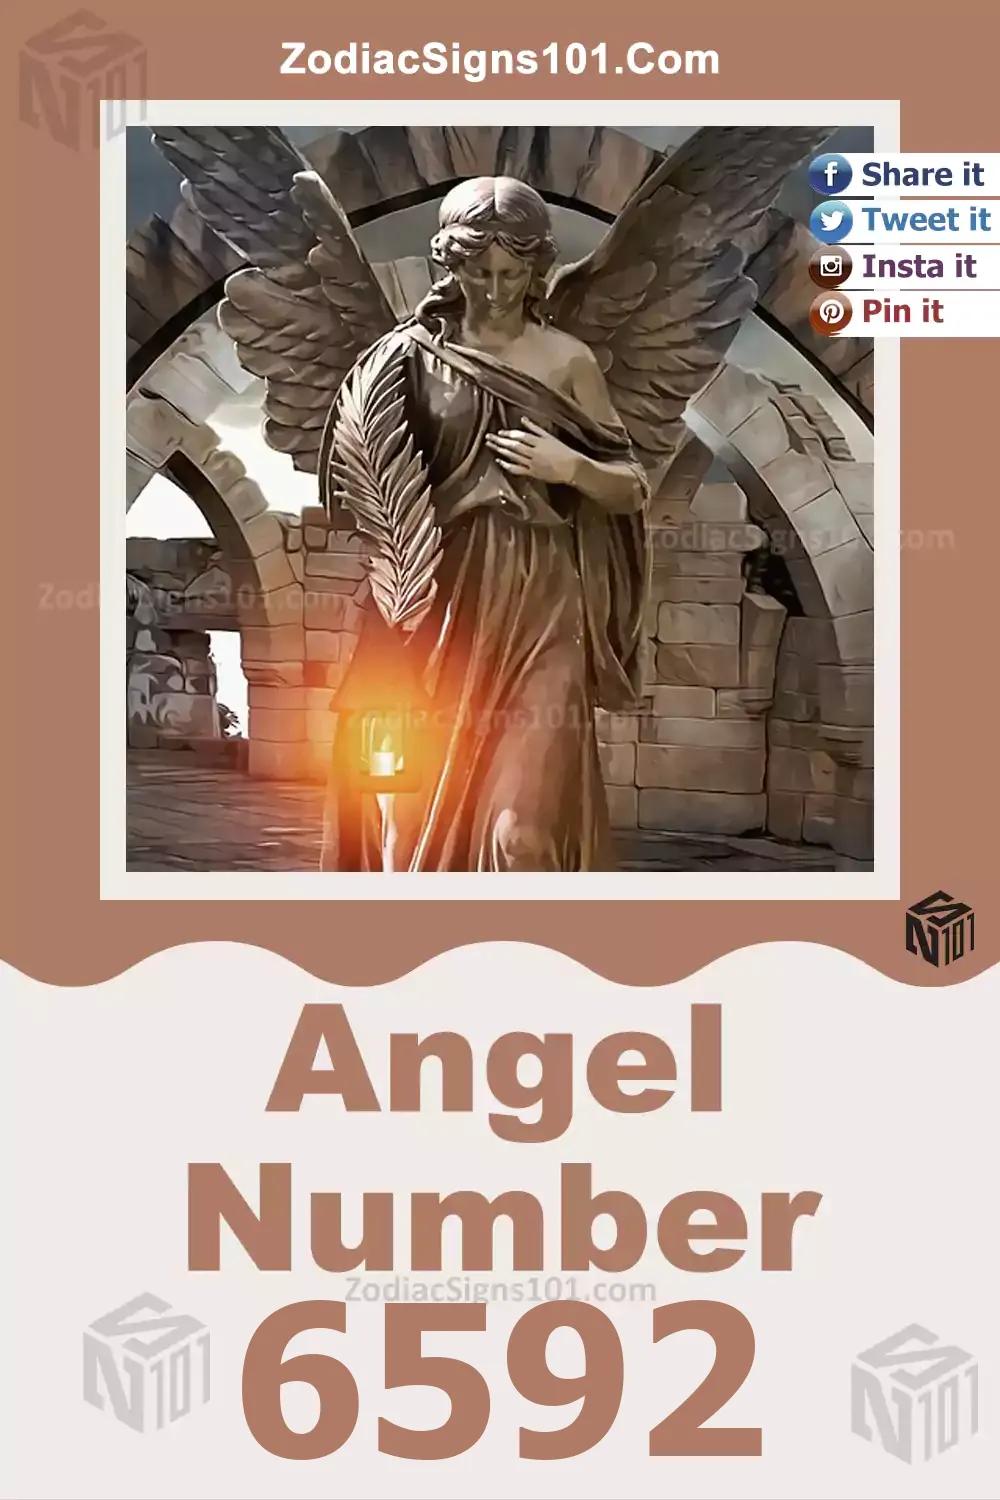 6592 Angel Number Meaning